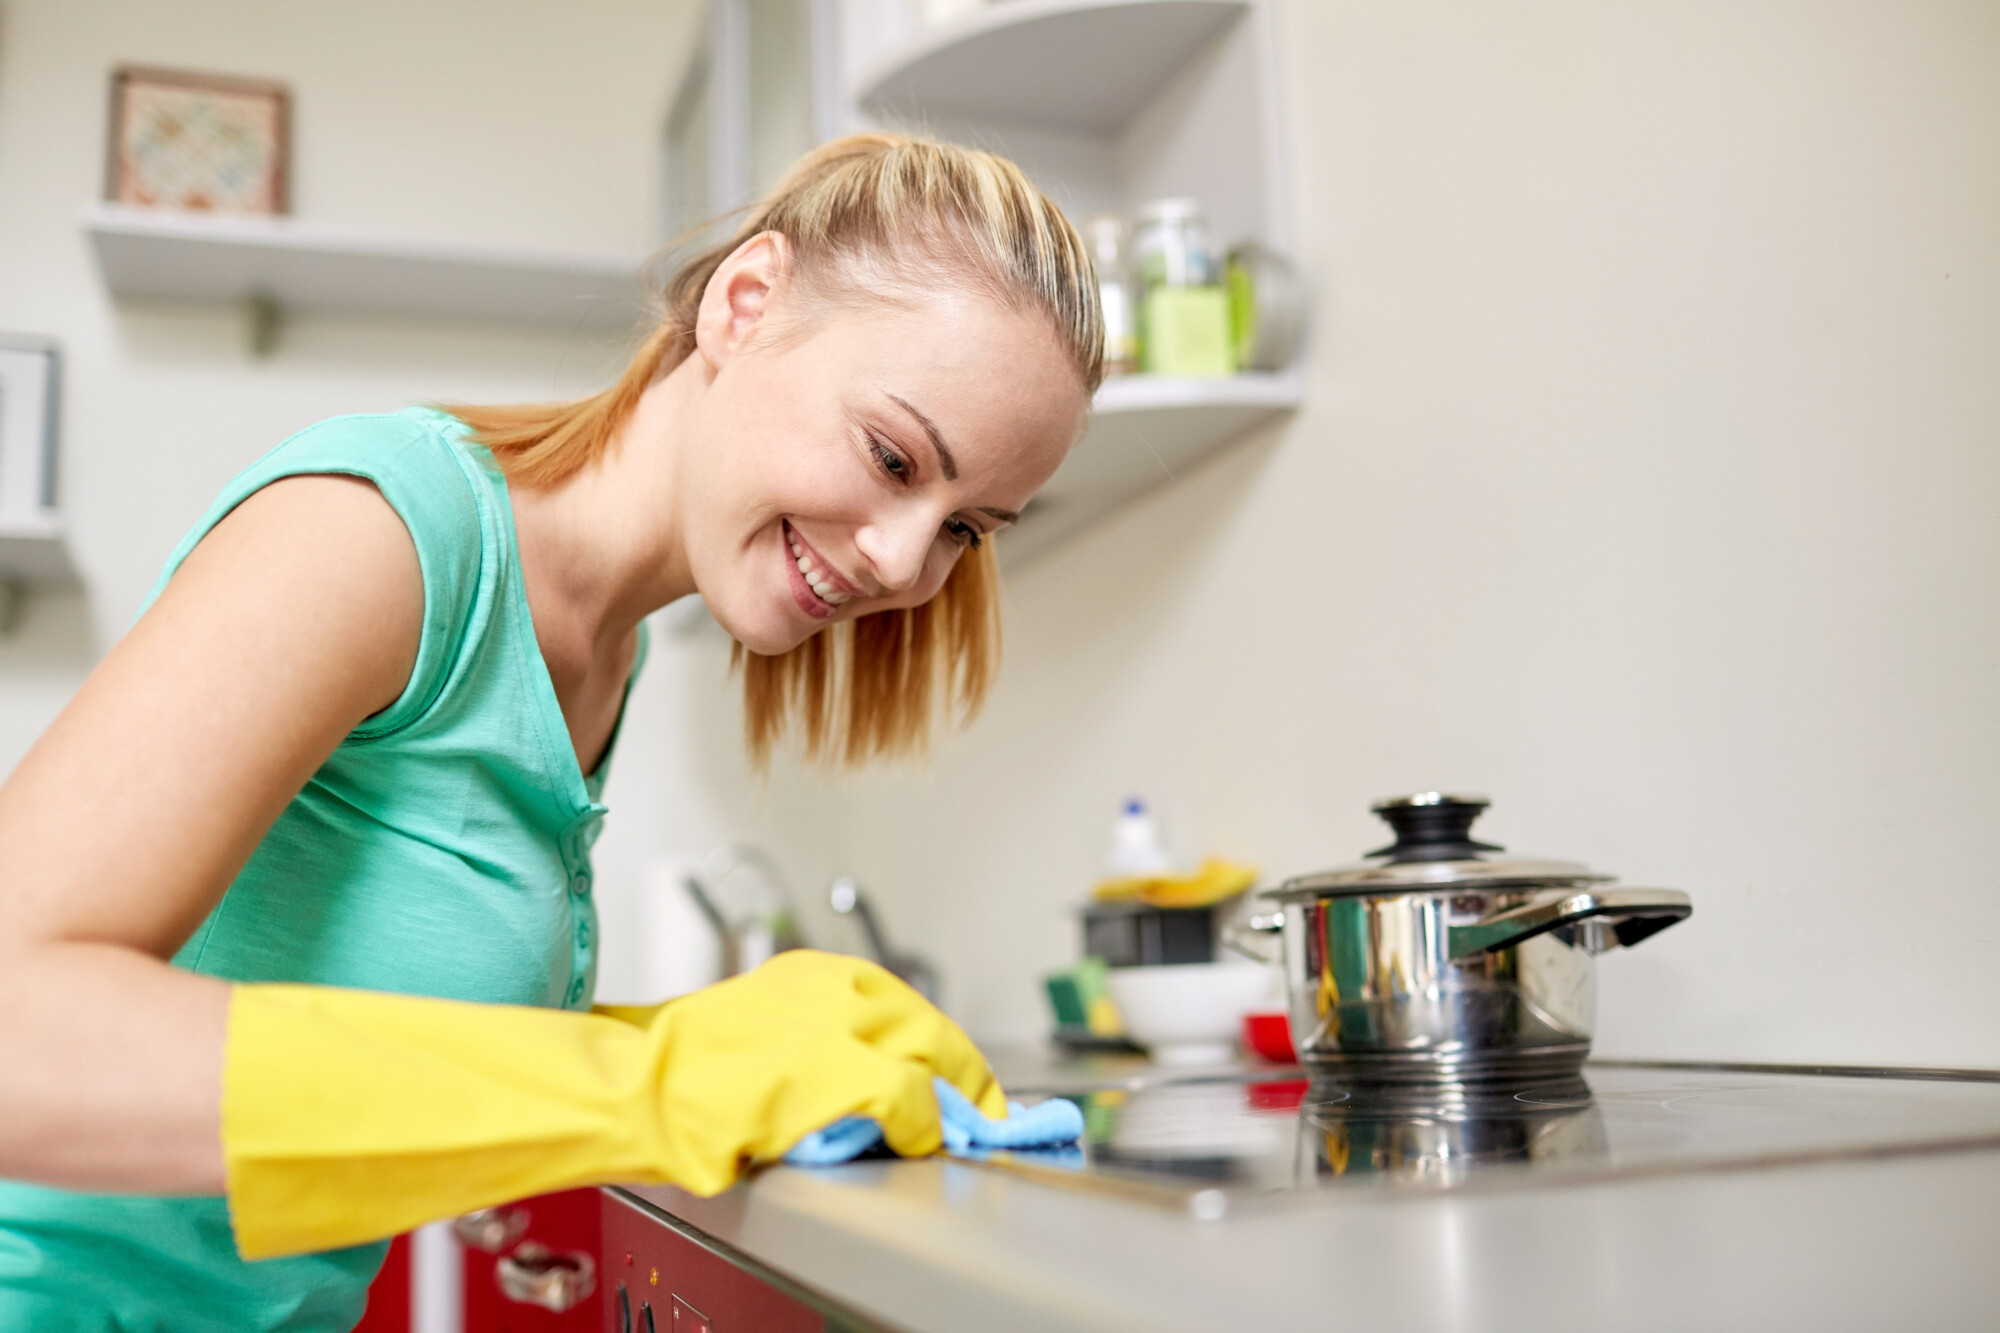 Are you struggling to keep your stove clean at home? Here's a quick guide on how to remove unwanted grease from your stove in no time.